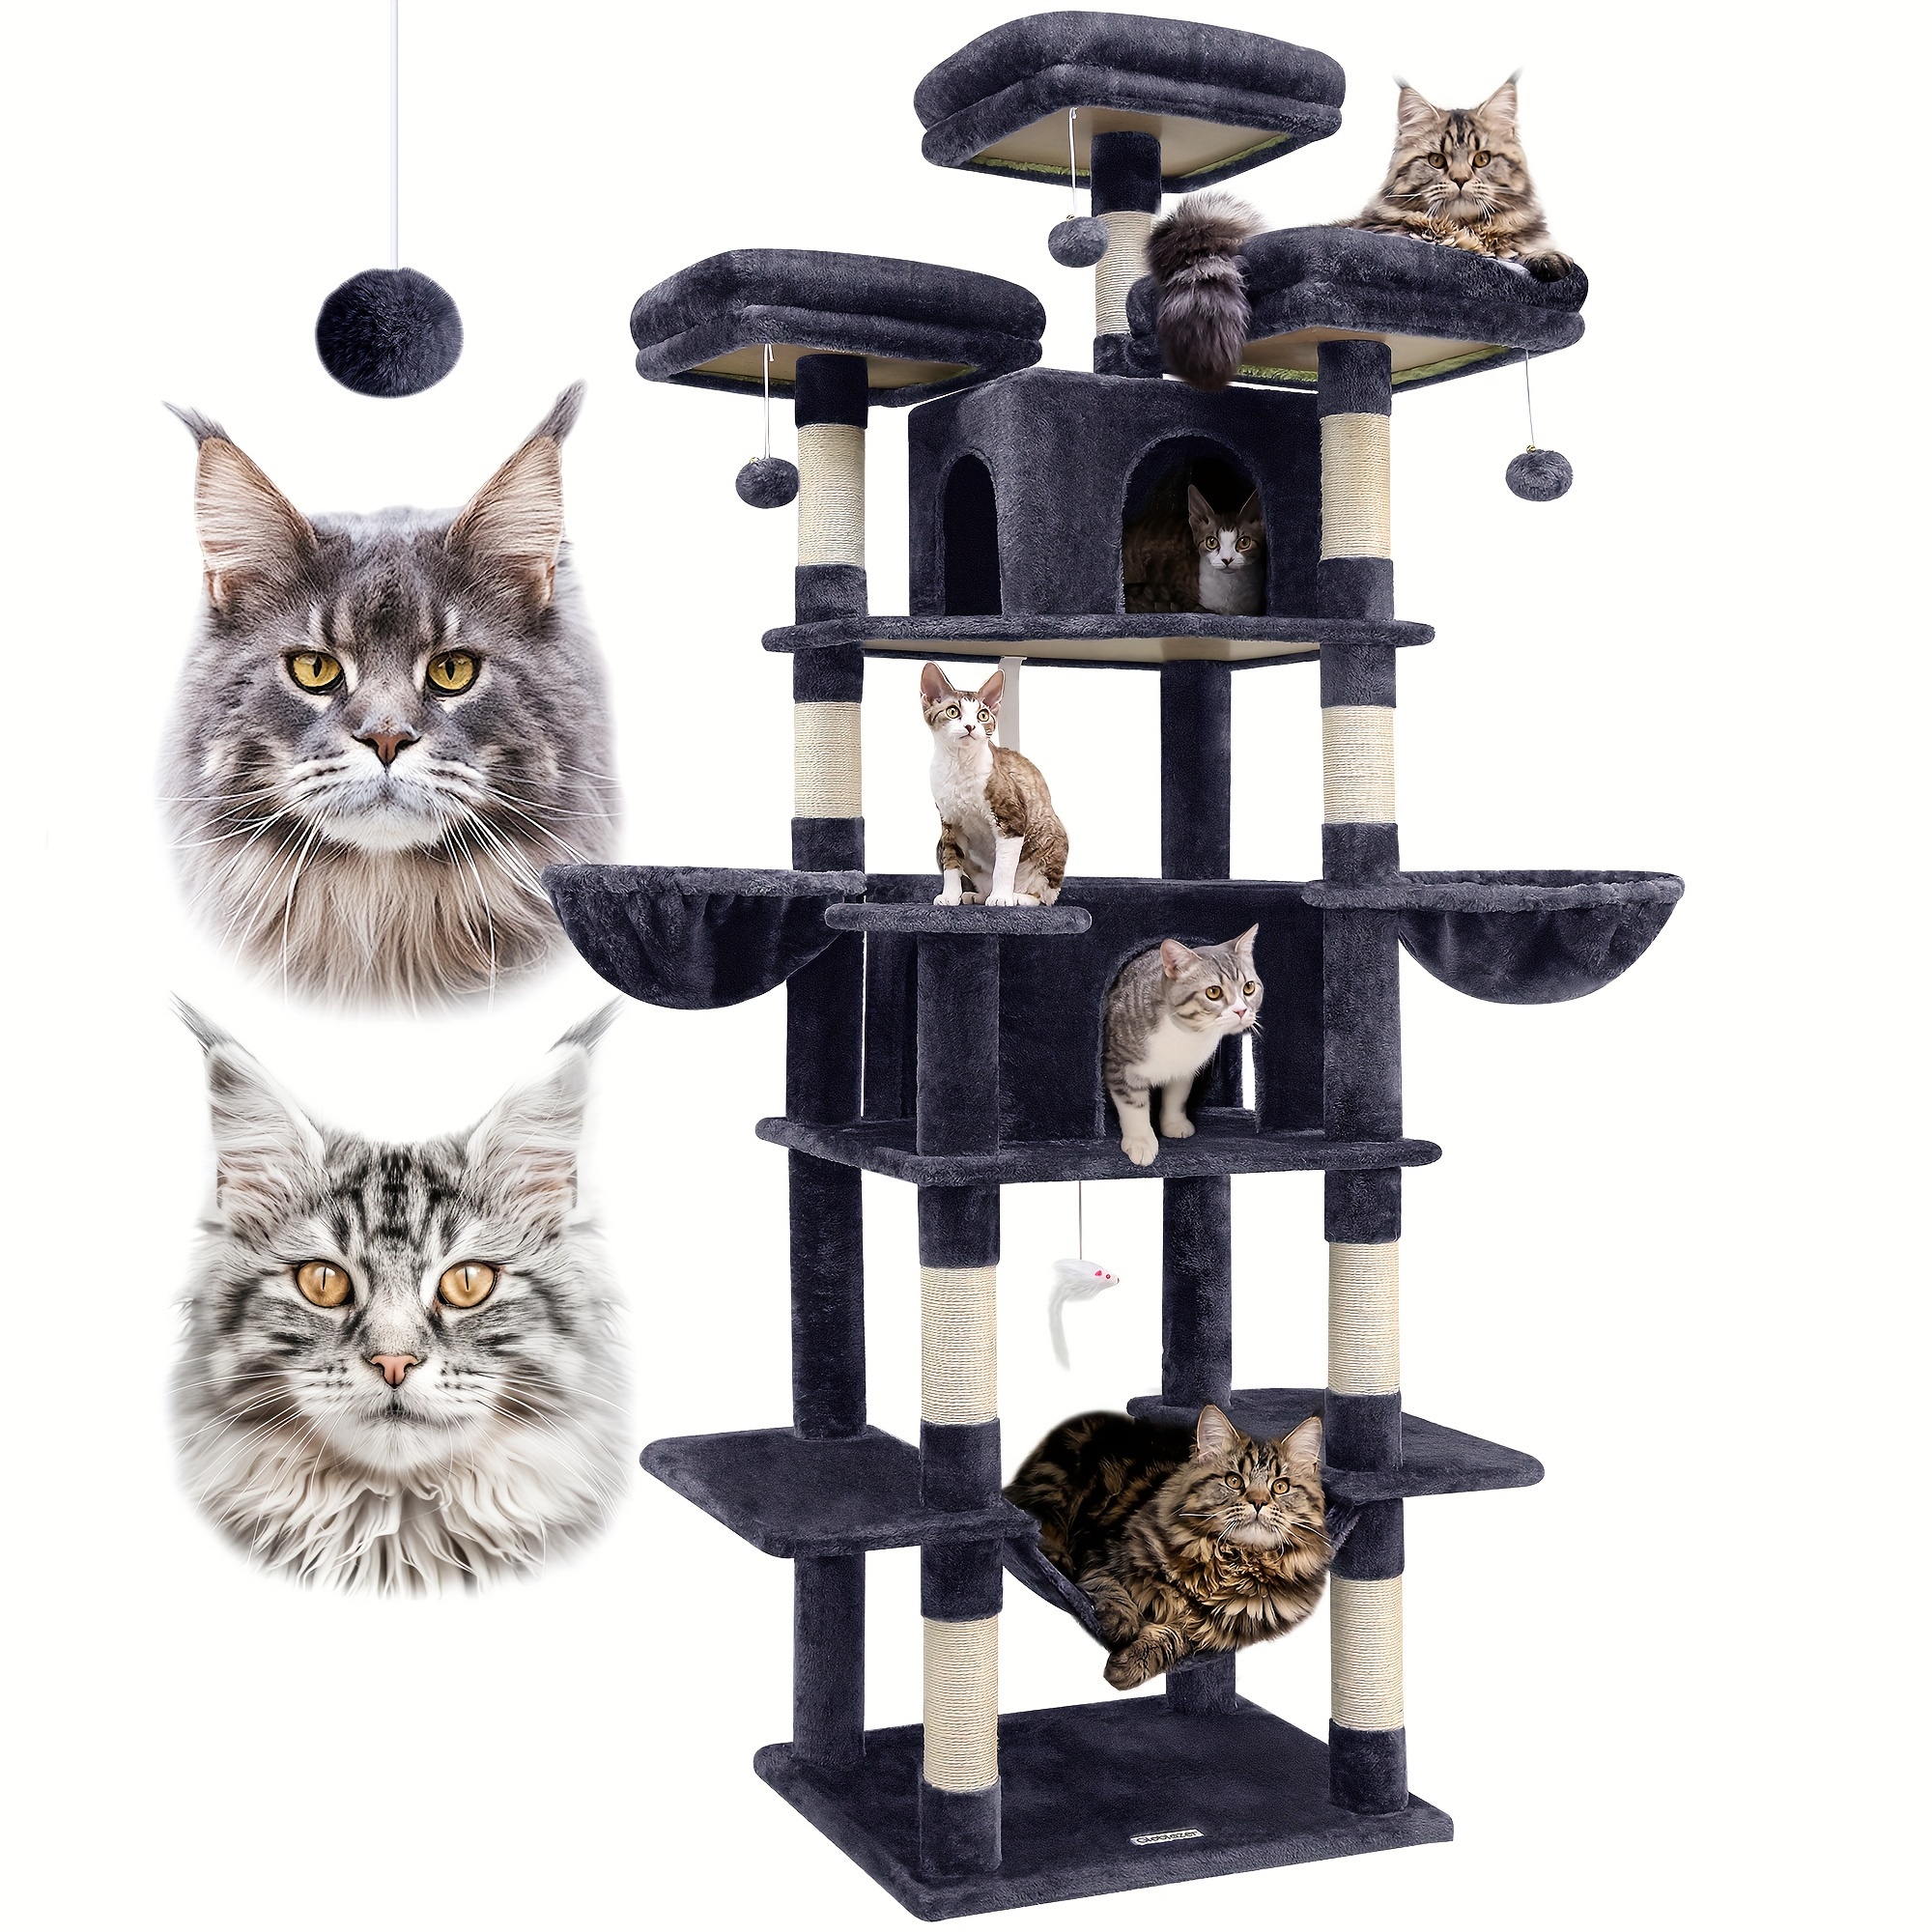 

F80 Tall Cat Tree, 80inch Cat Tree Tower For Indoor Multiple Adult Cats Xxl Cat Tree With Scratching Post, Hammock, 3 Perches, 2 Condos, 2 Hanging Basket